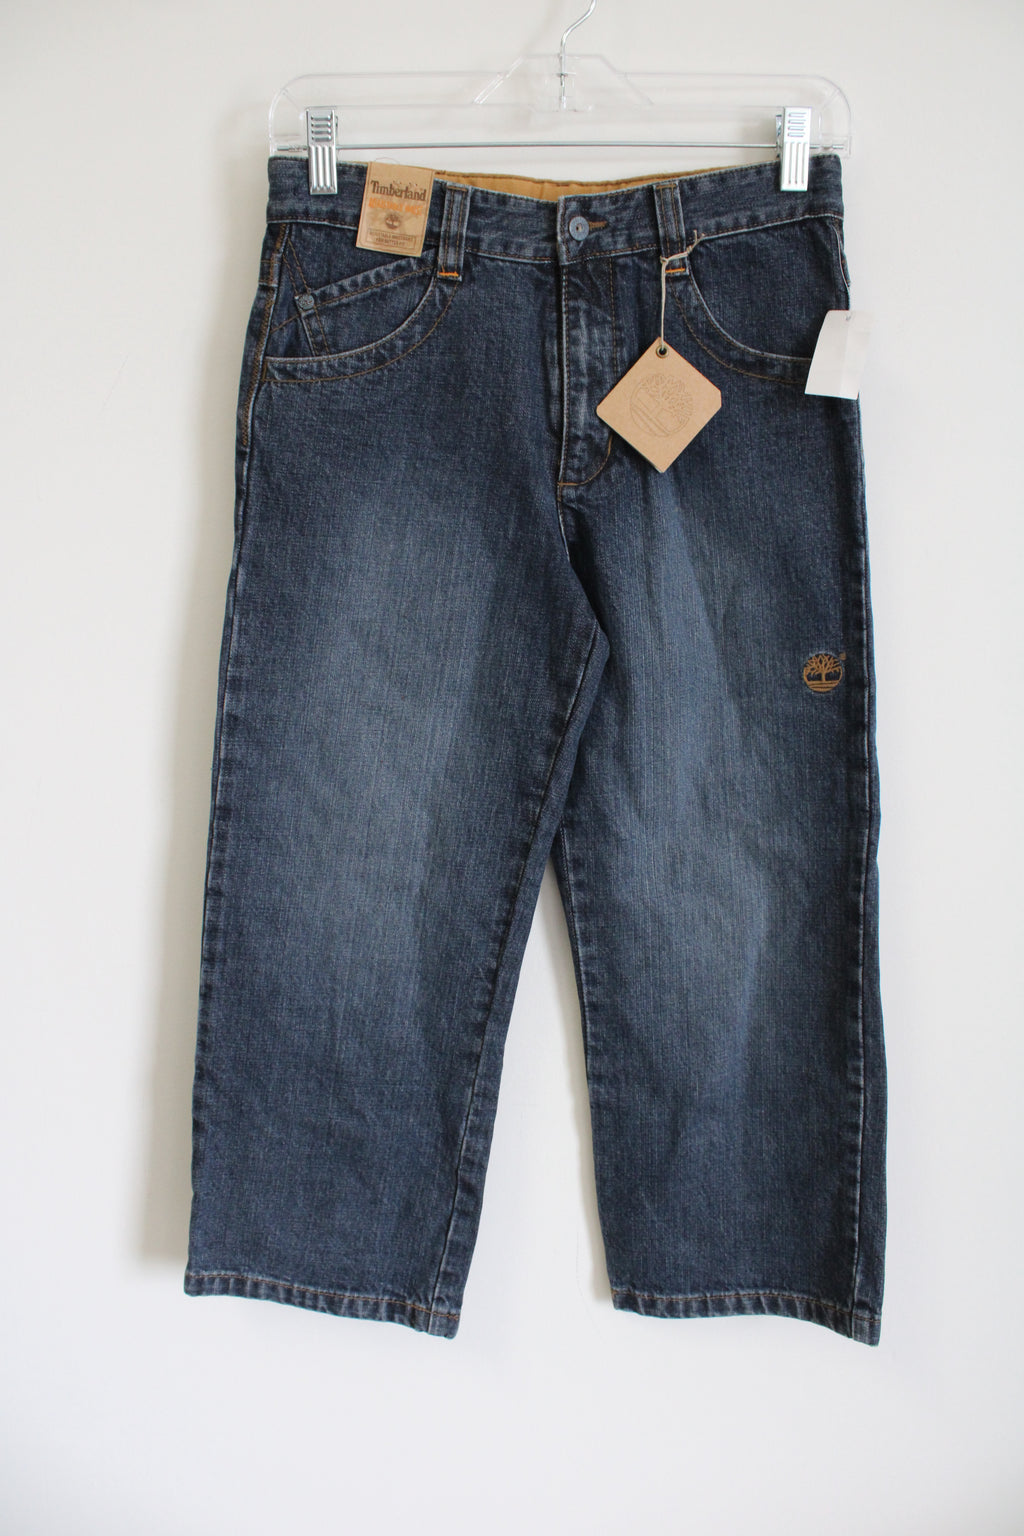 NEW Timberland Utility Jeans | 7